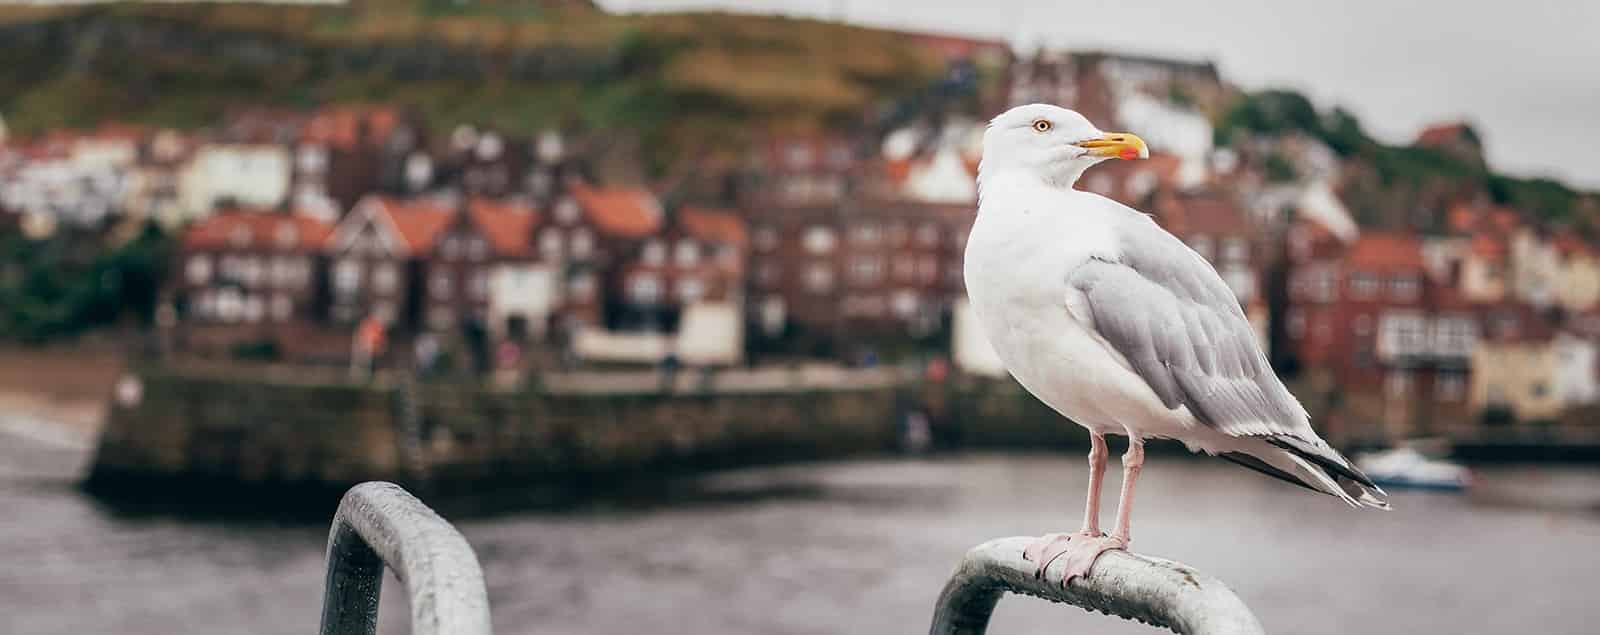 Seagull with background of seaside town